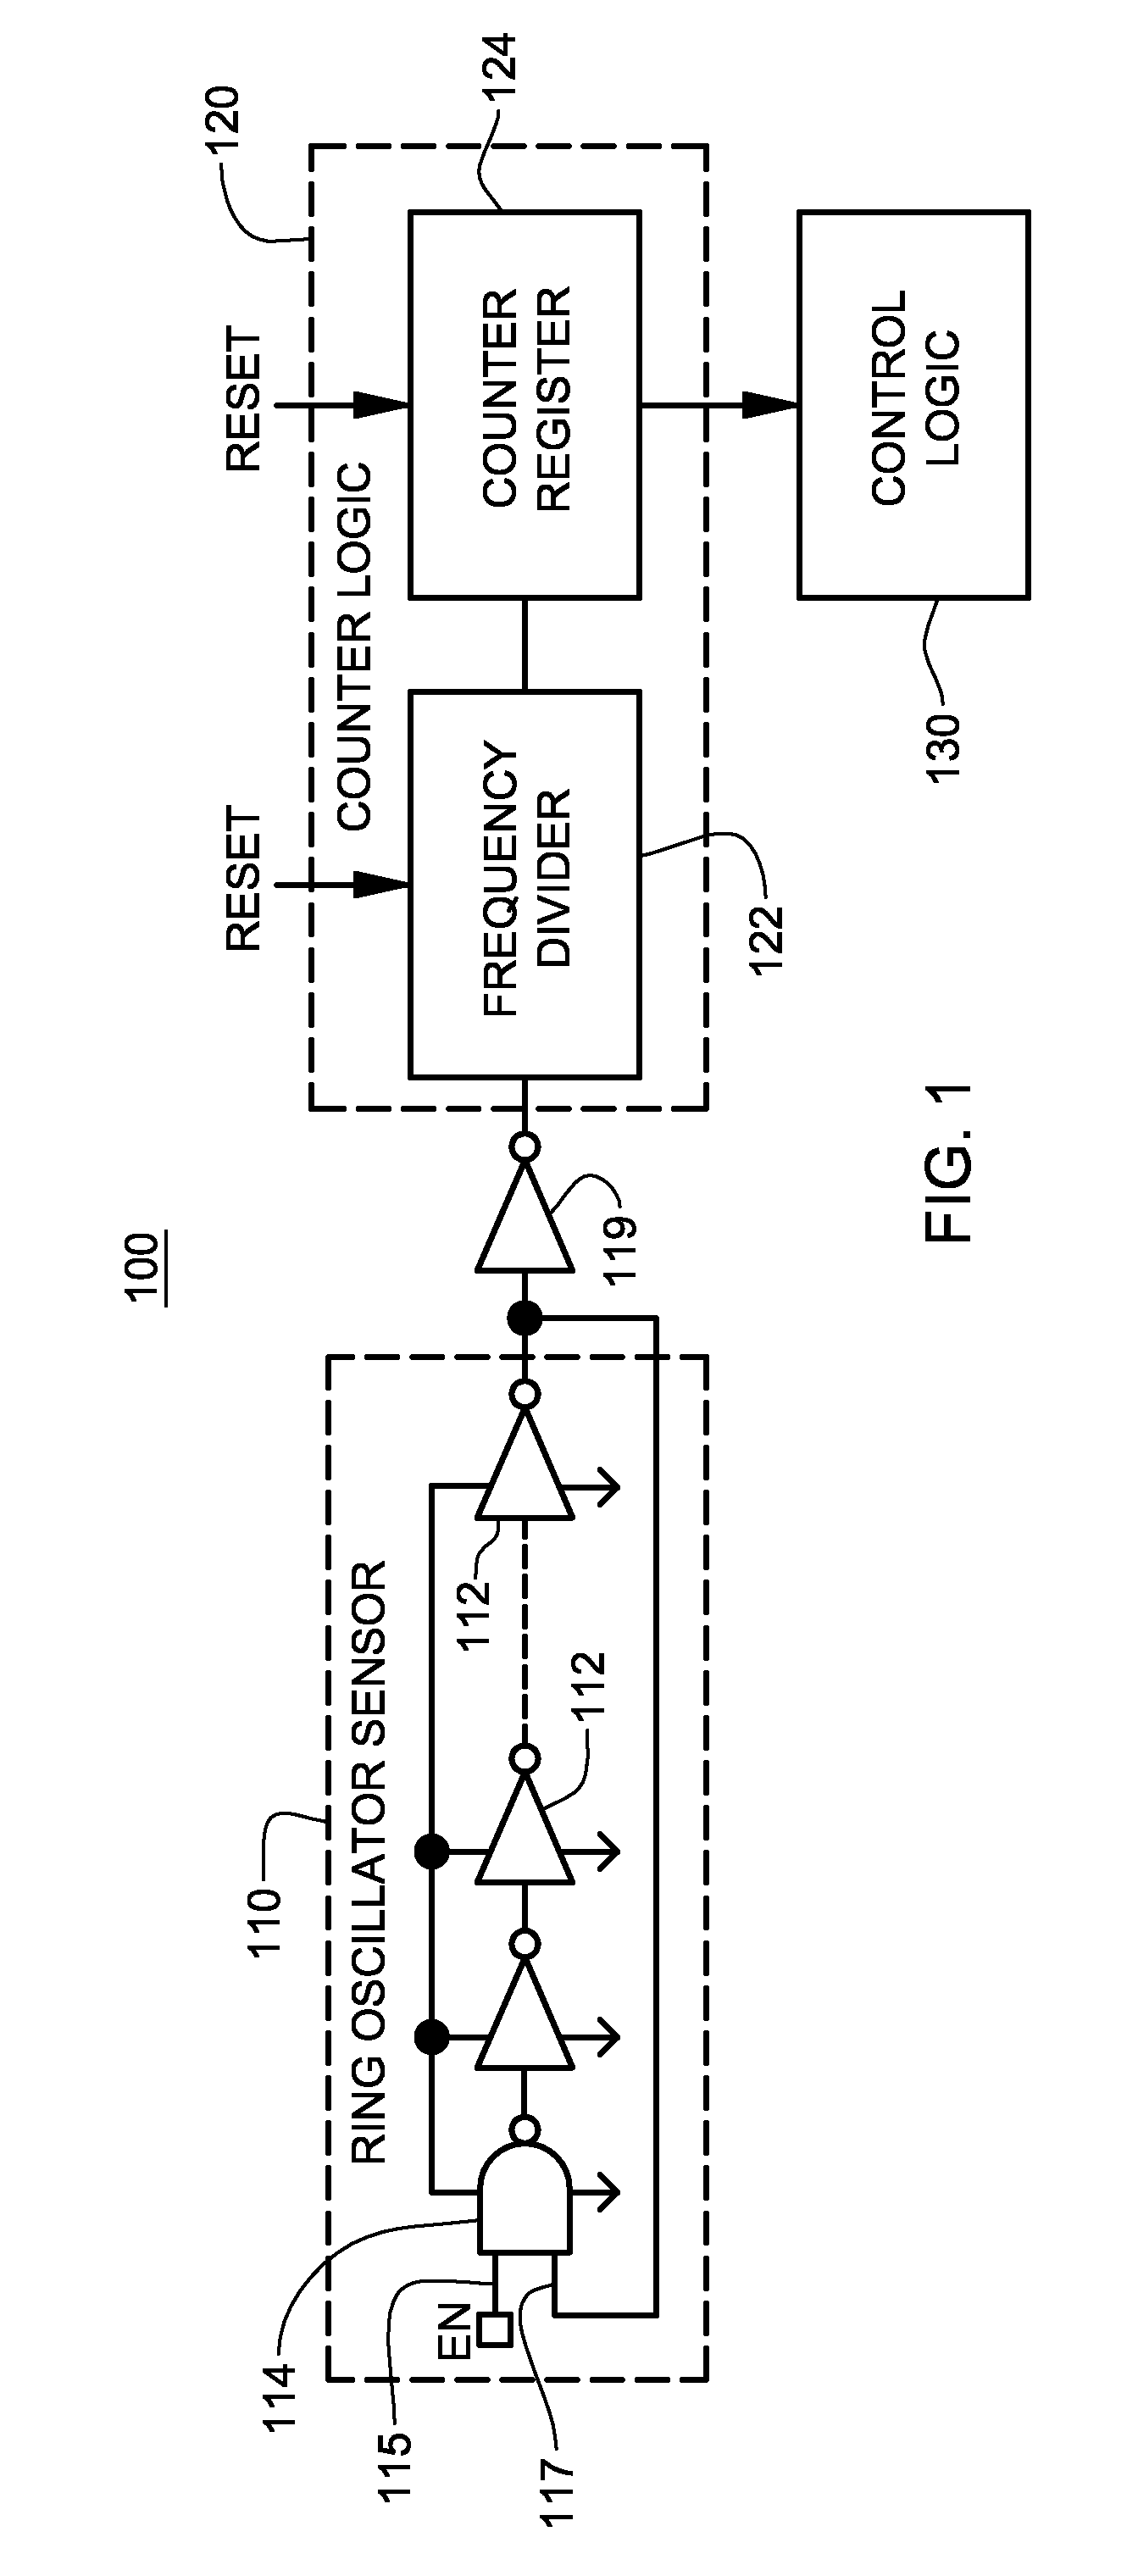 System and method for monitoring reliability of a digital system